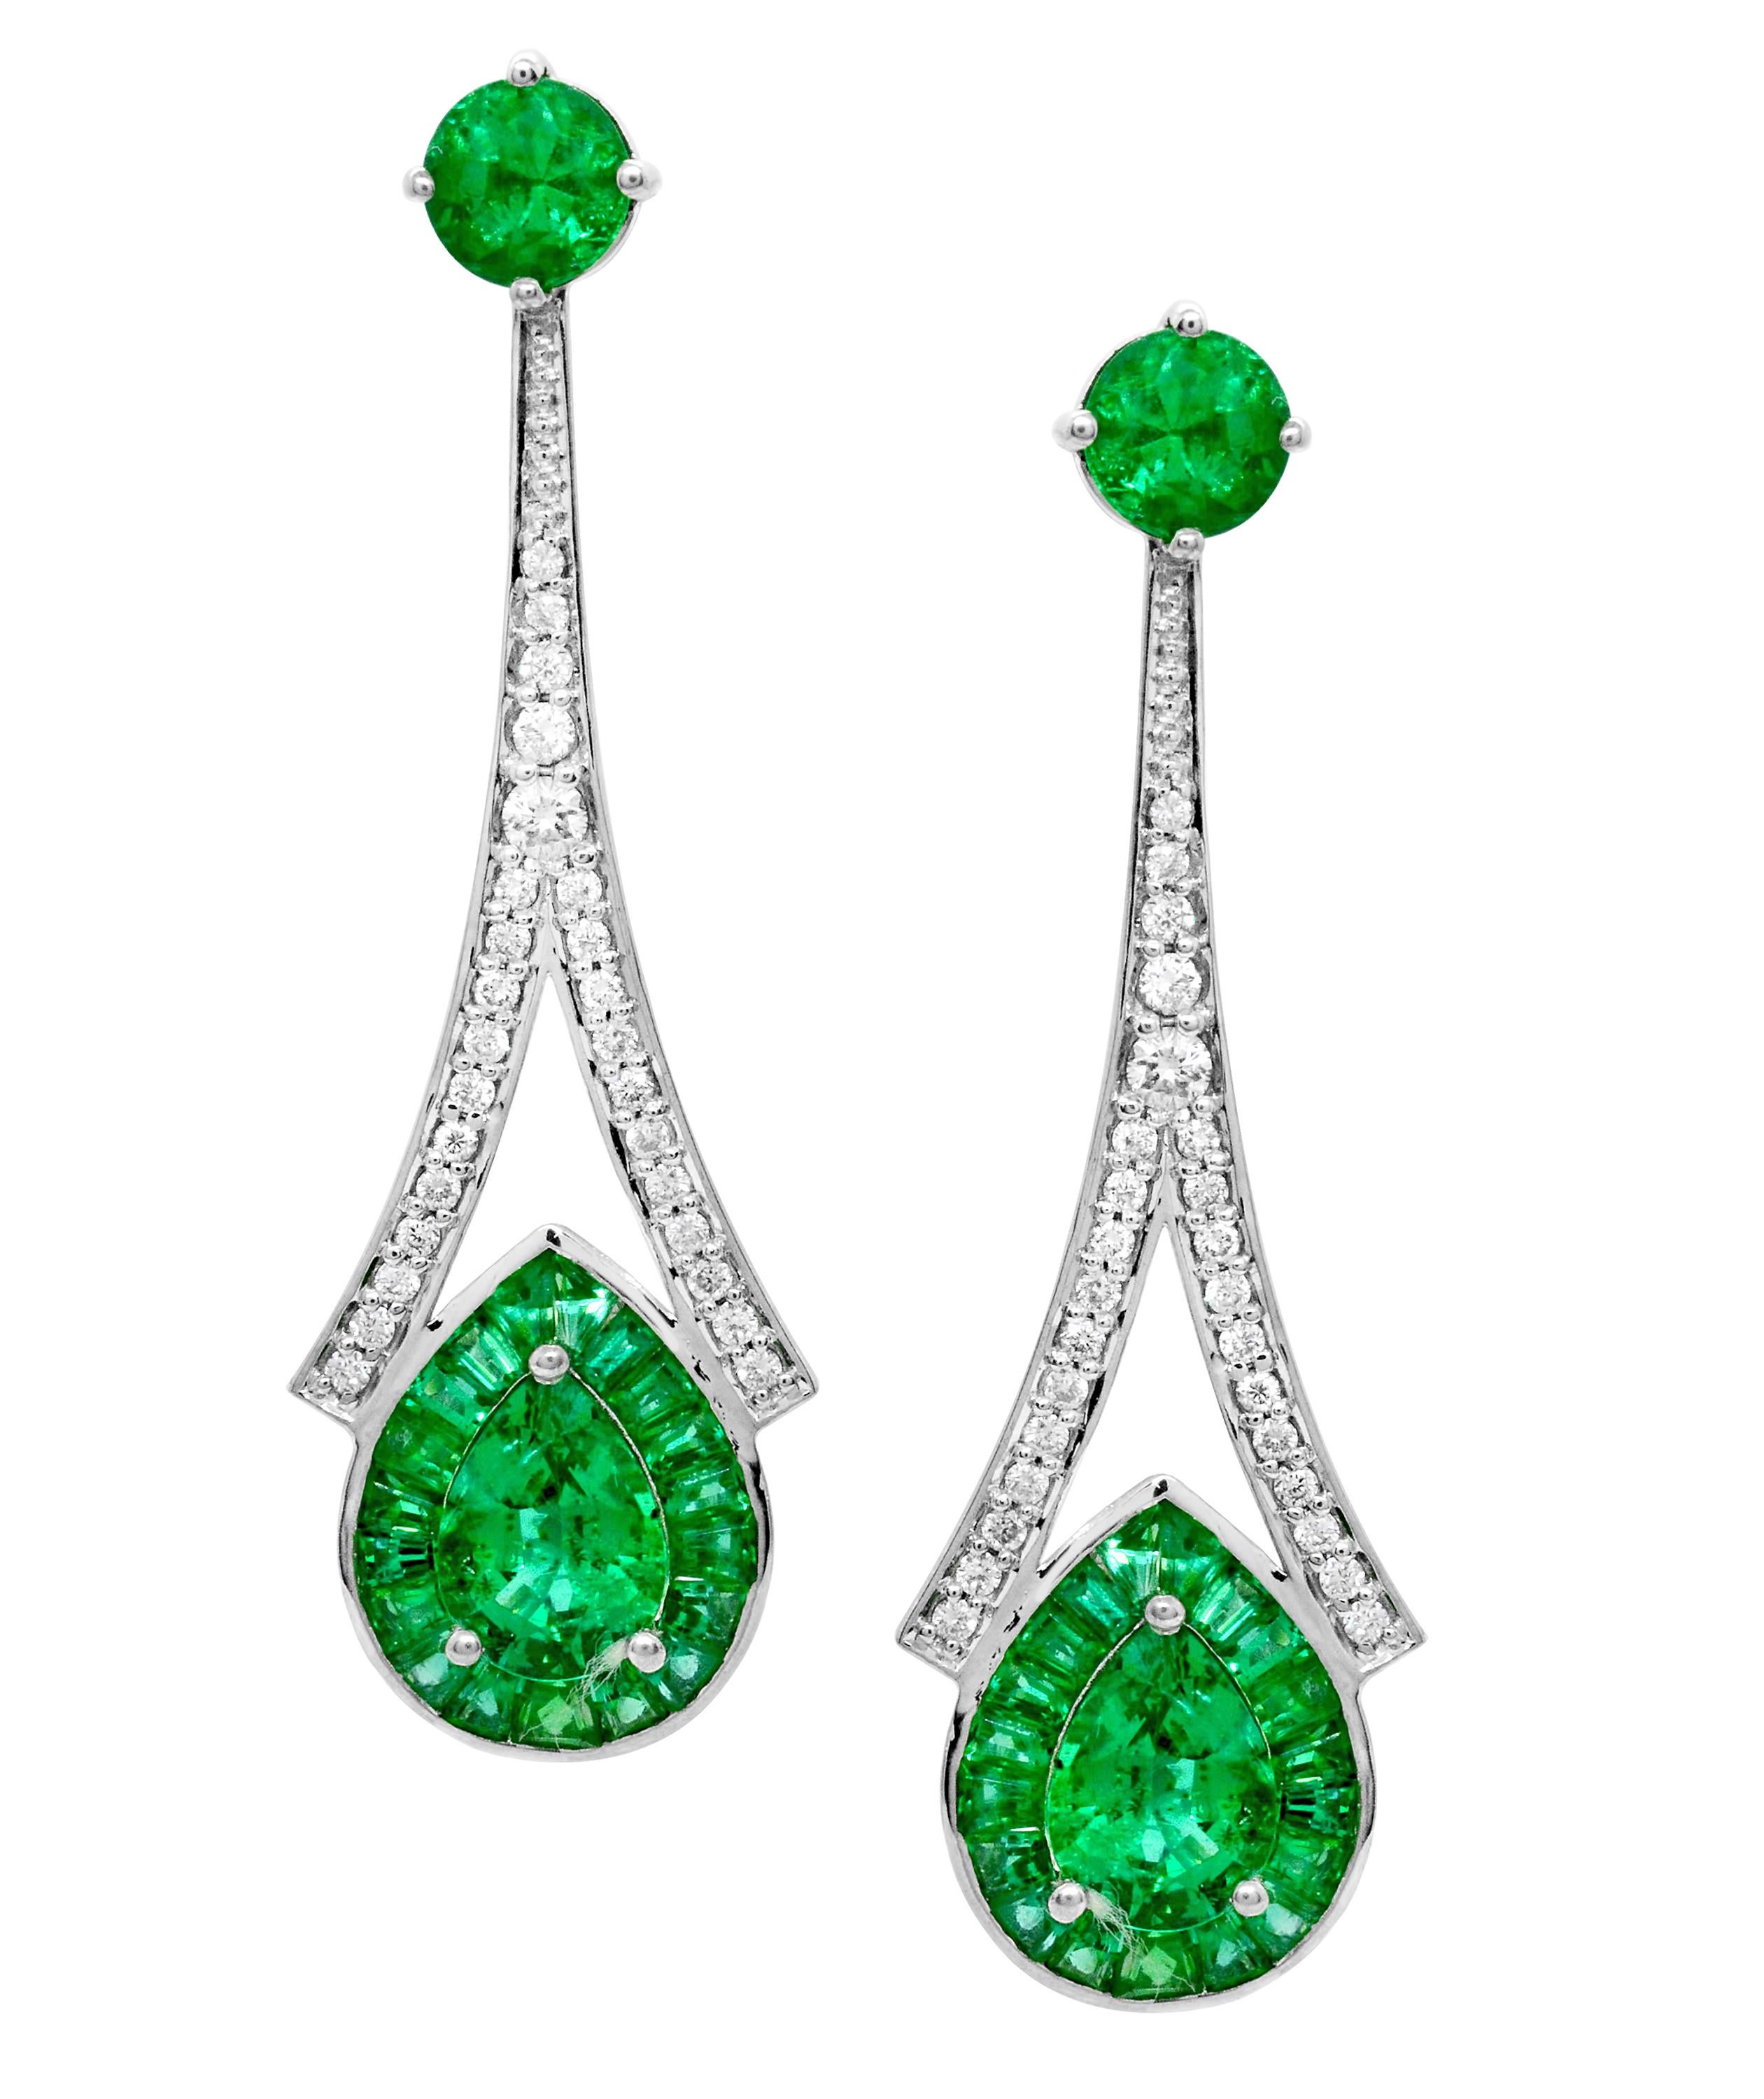 Intensely green emeralds.  These stunning drop earrings have a 1.28 carat total weight of pear-shaped emerald set at the center, with baguette emeralds of varying sizes weighing 1.80 carat total weight.  The round emeralds at the top are 4.50 mm